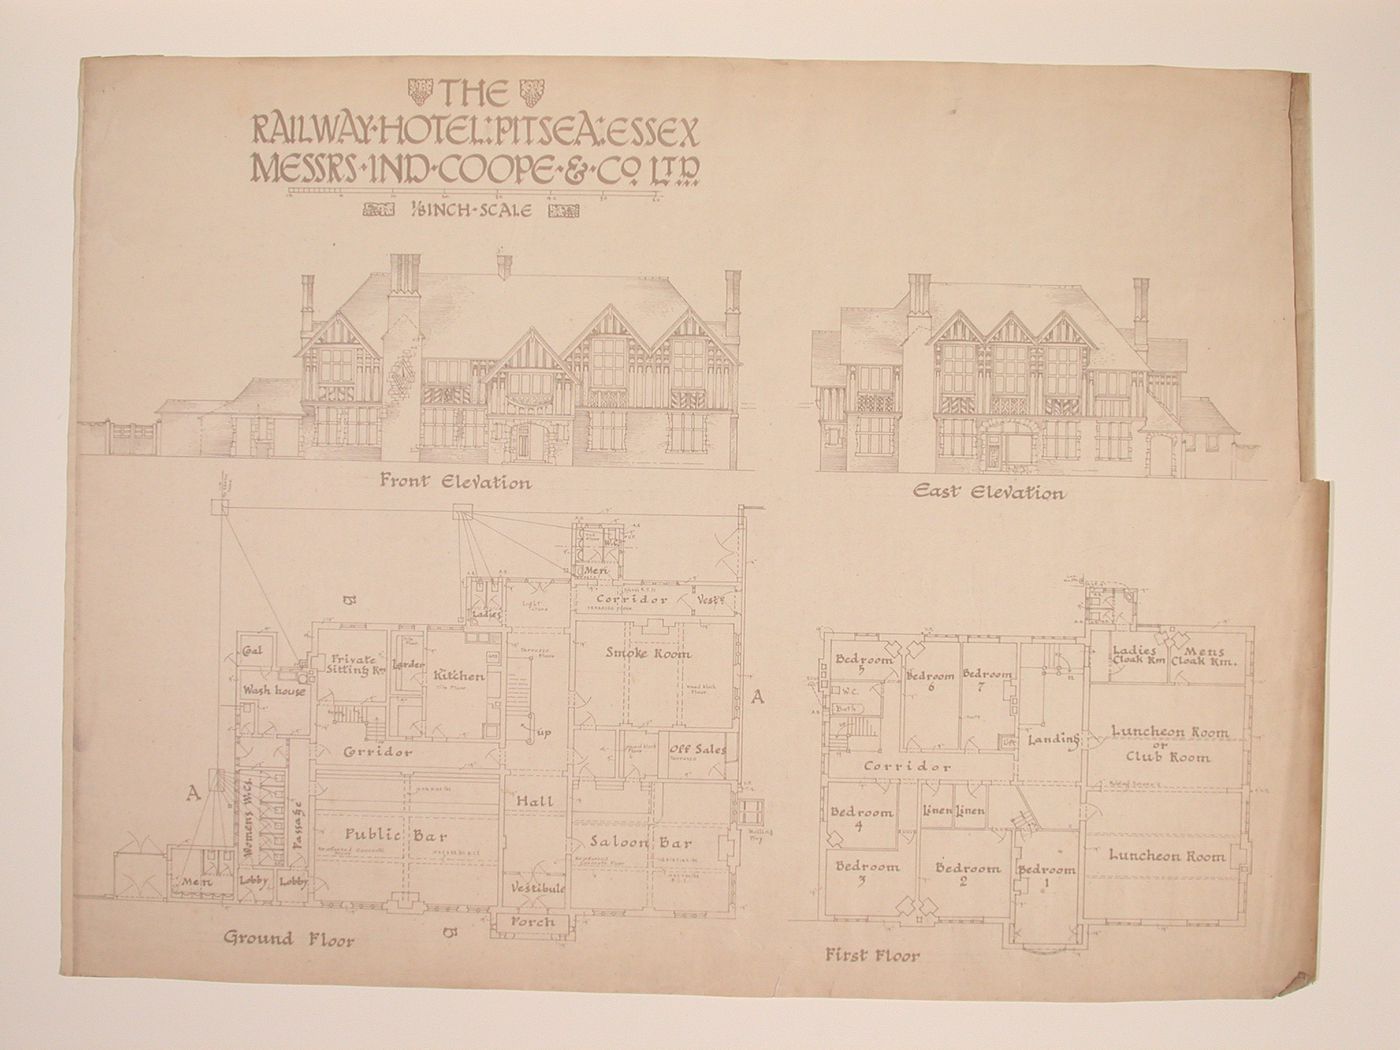 Front and east elevations and ground and first floor plans for the Railway Hotel, Pitsea